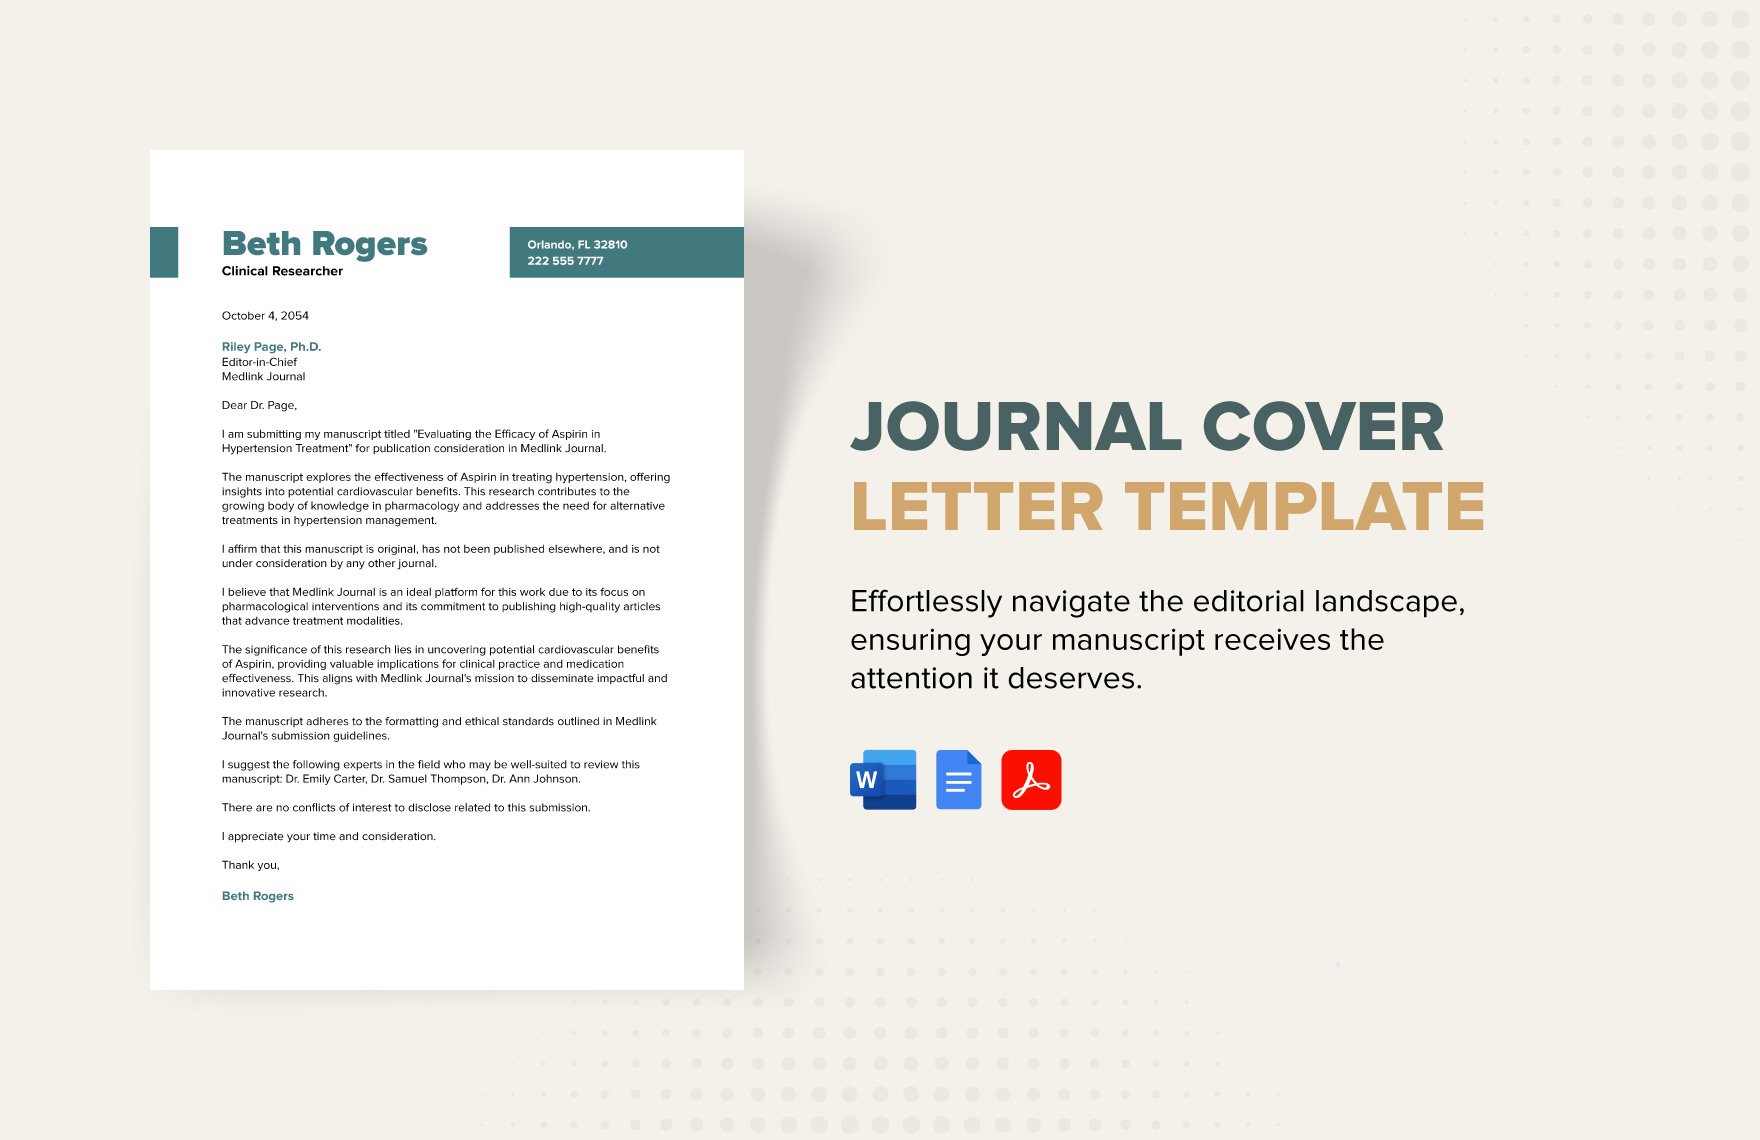 Journal Cover Letter Template